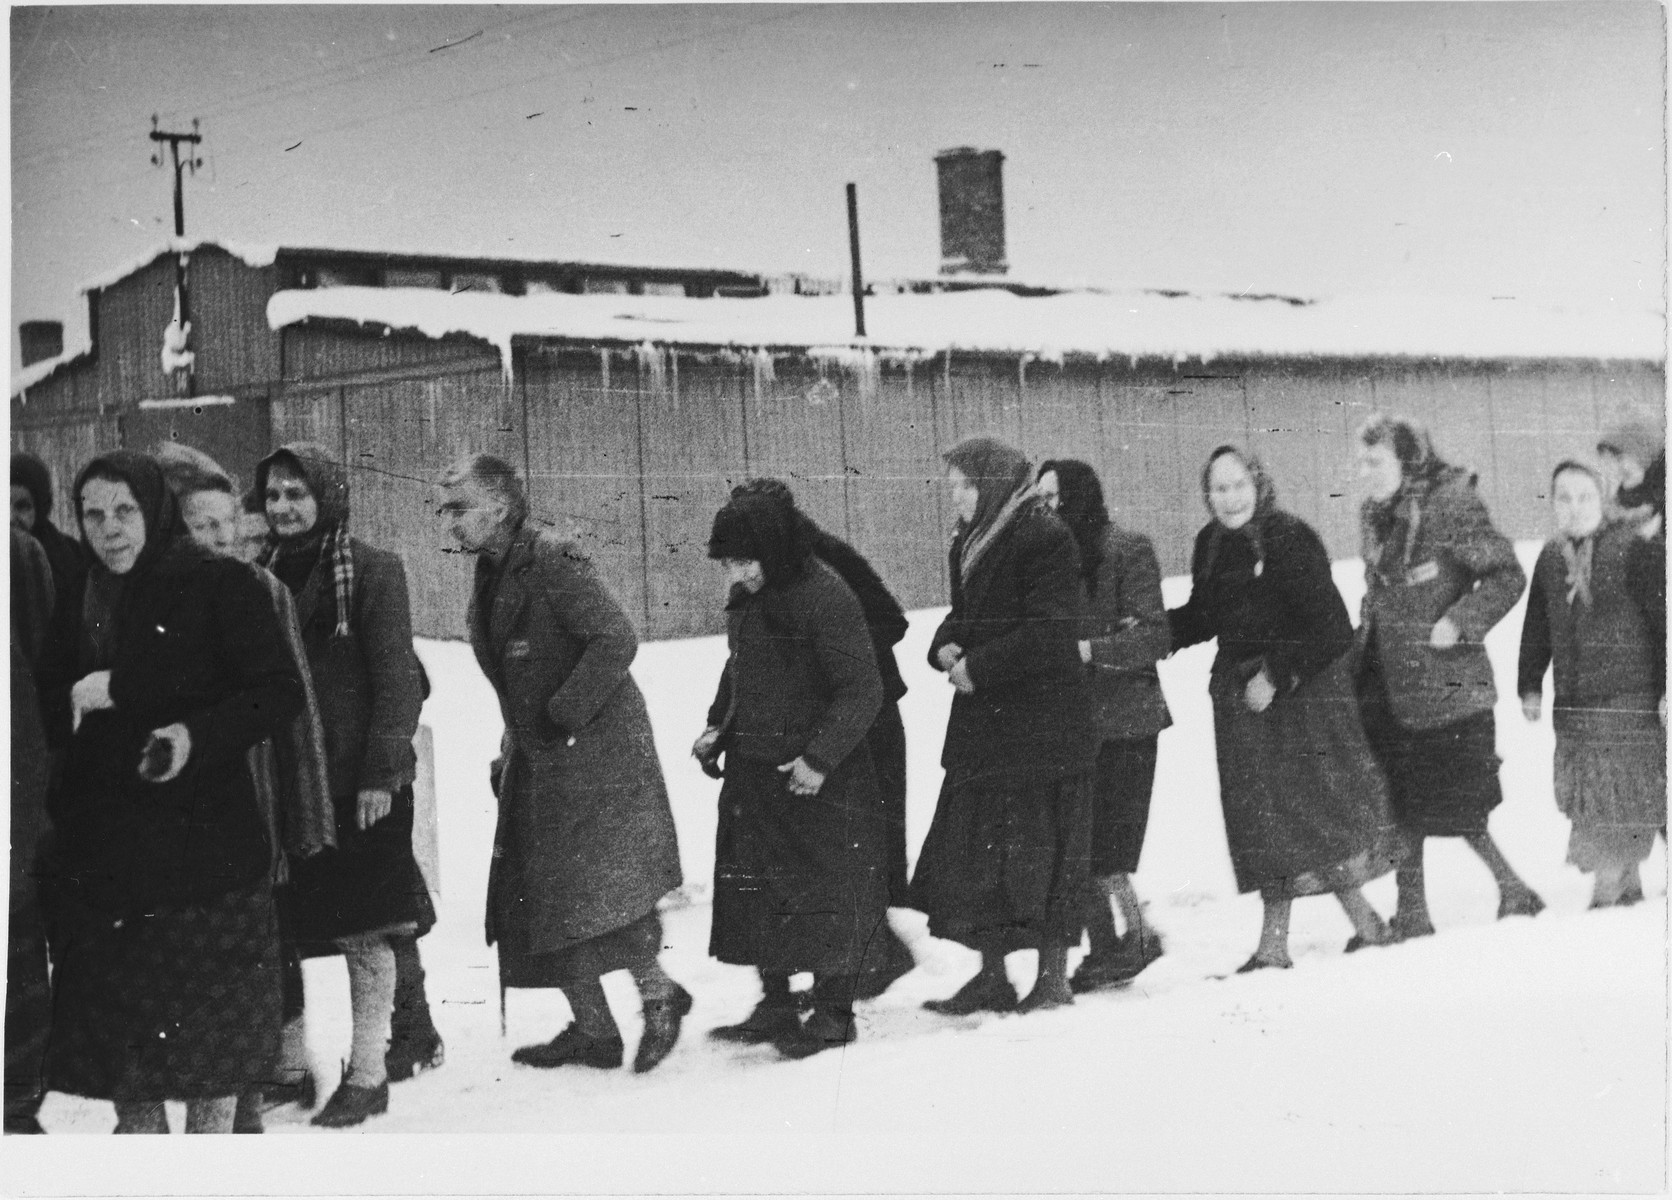 A group of female survivors trudge through the snow immediately after the liberation of Auschwitz-Birkenau.

Original caption:  "Those who survived.  Some were in the hospital, some hid before evacuation."